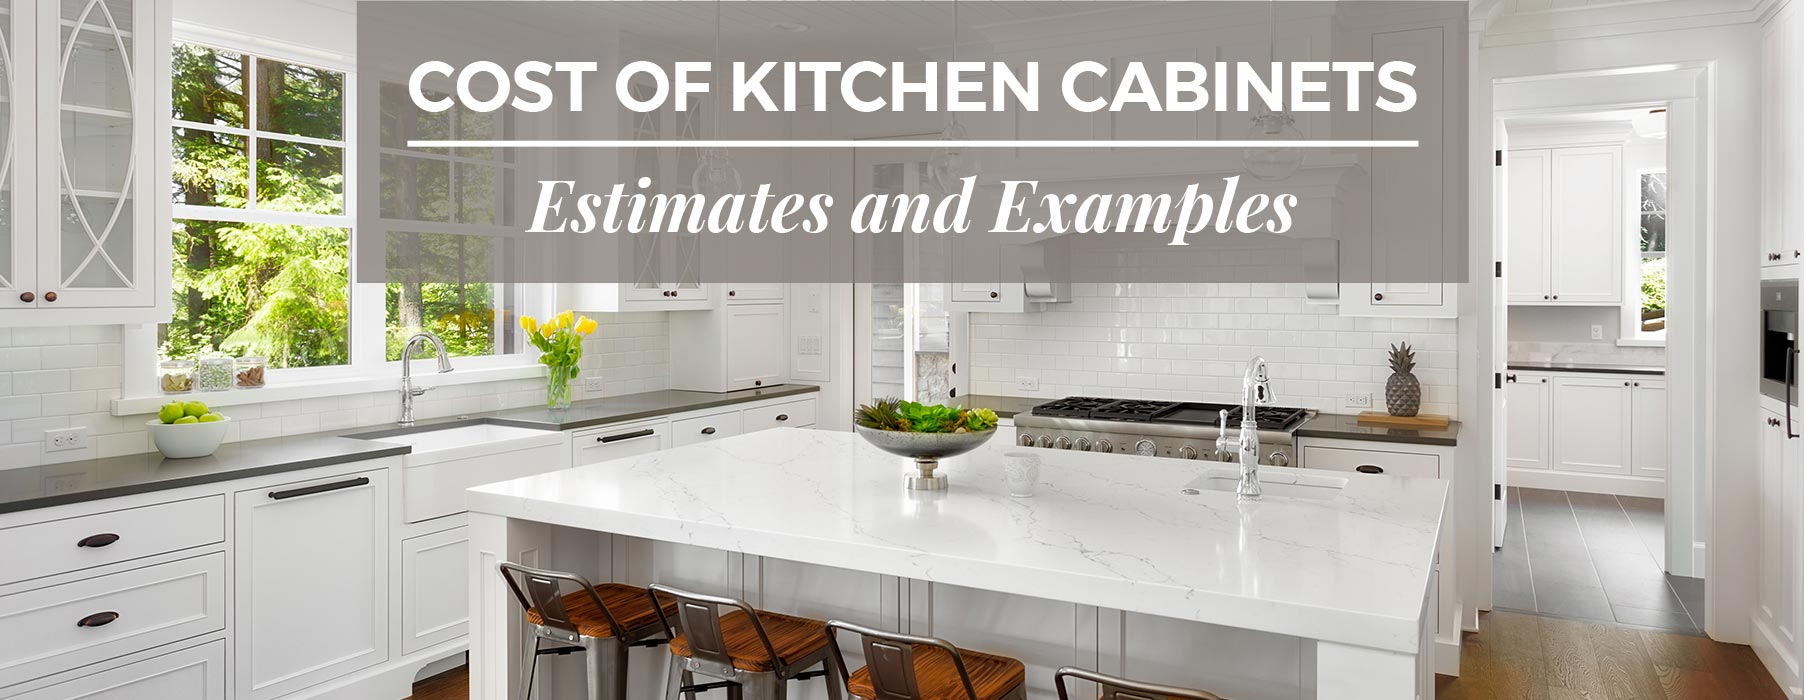 Cost Of Kitchen Cabinets Estimates And Examples